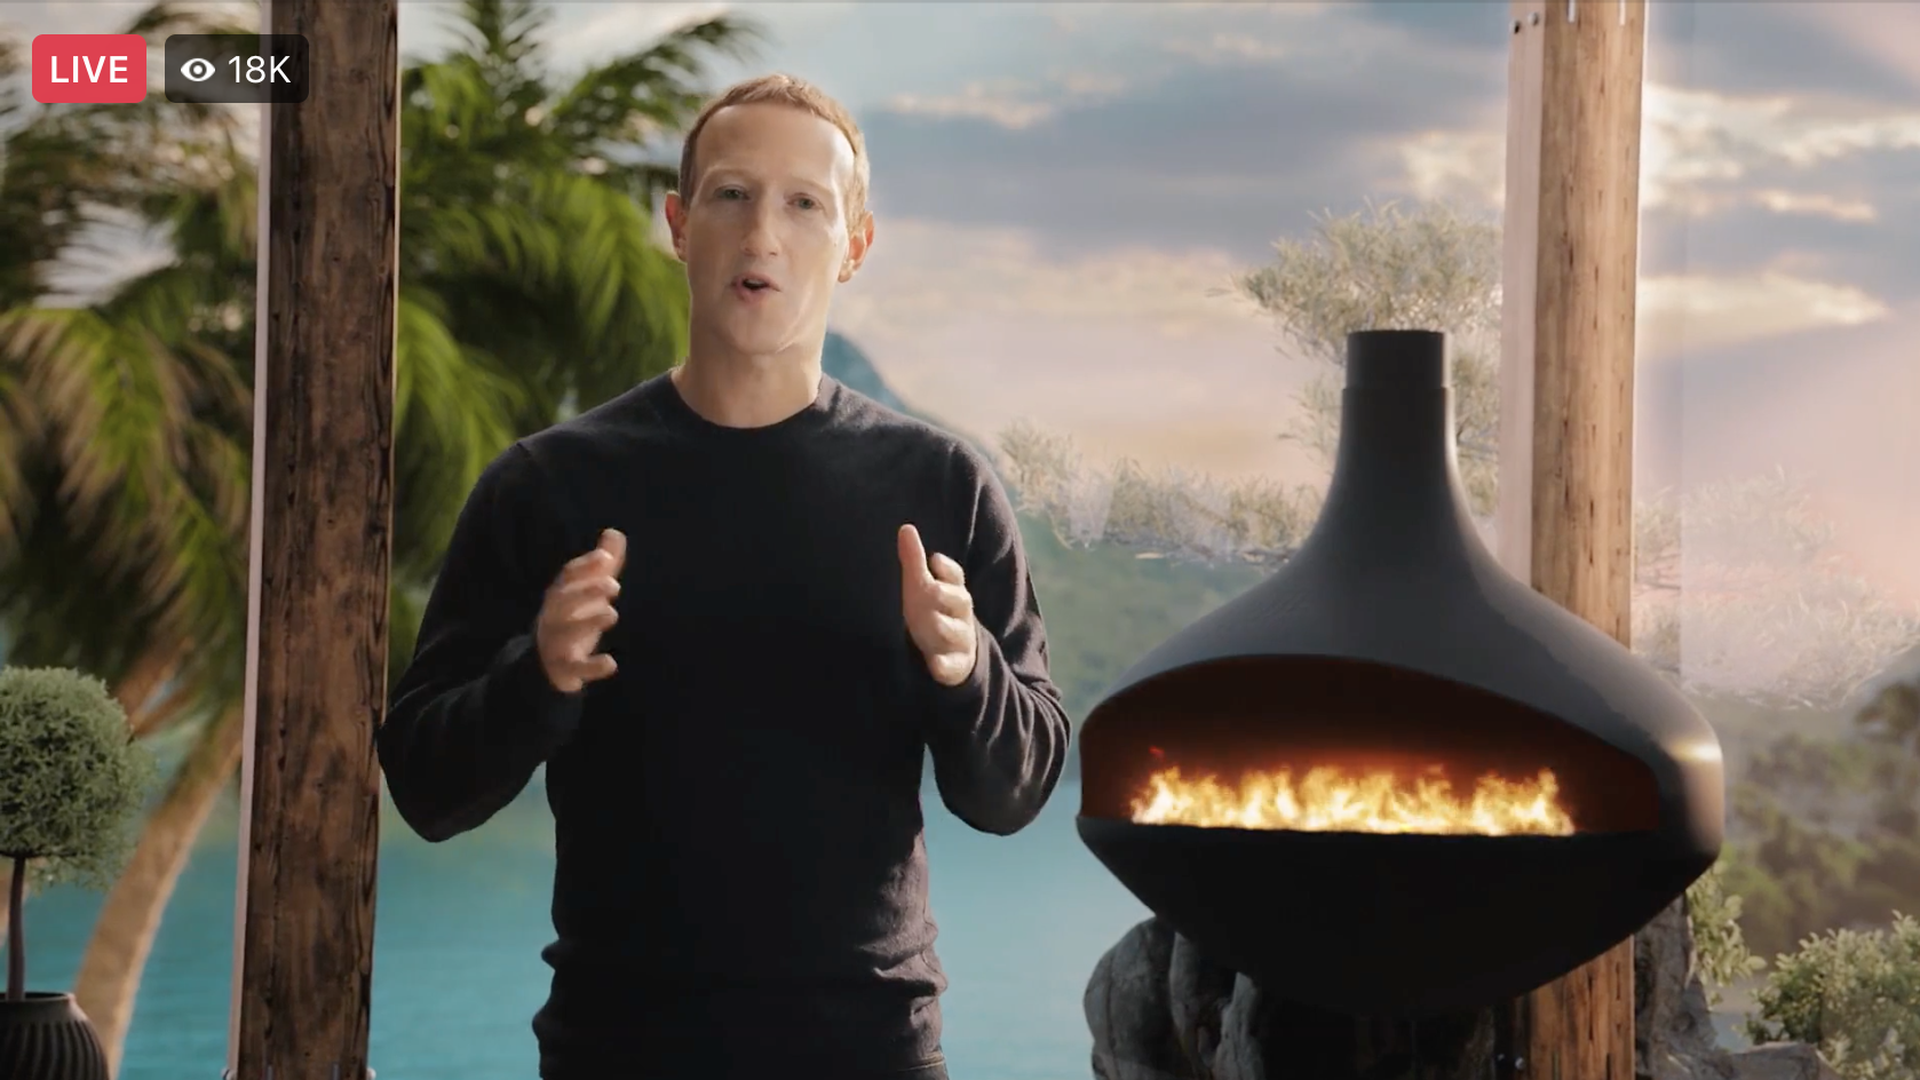 Photo of Mark Zuckerberg introducing Facebook's metaverse plan standing in front of a modernist fireplace